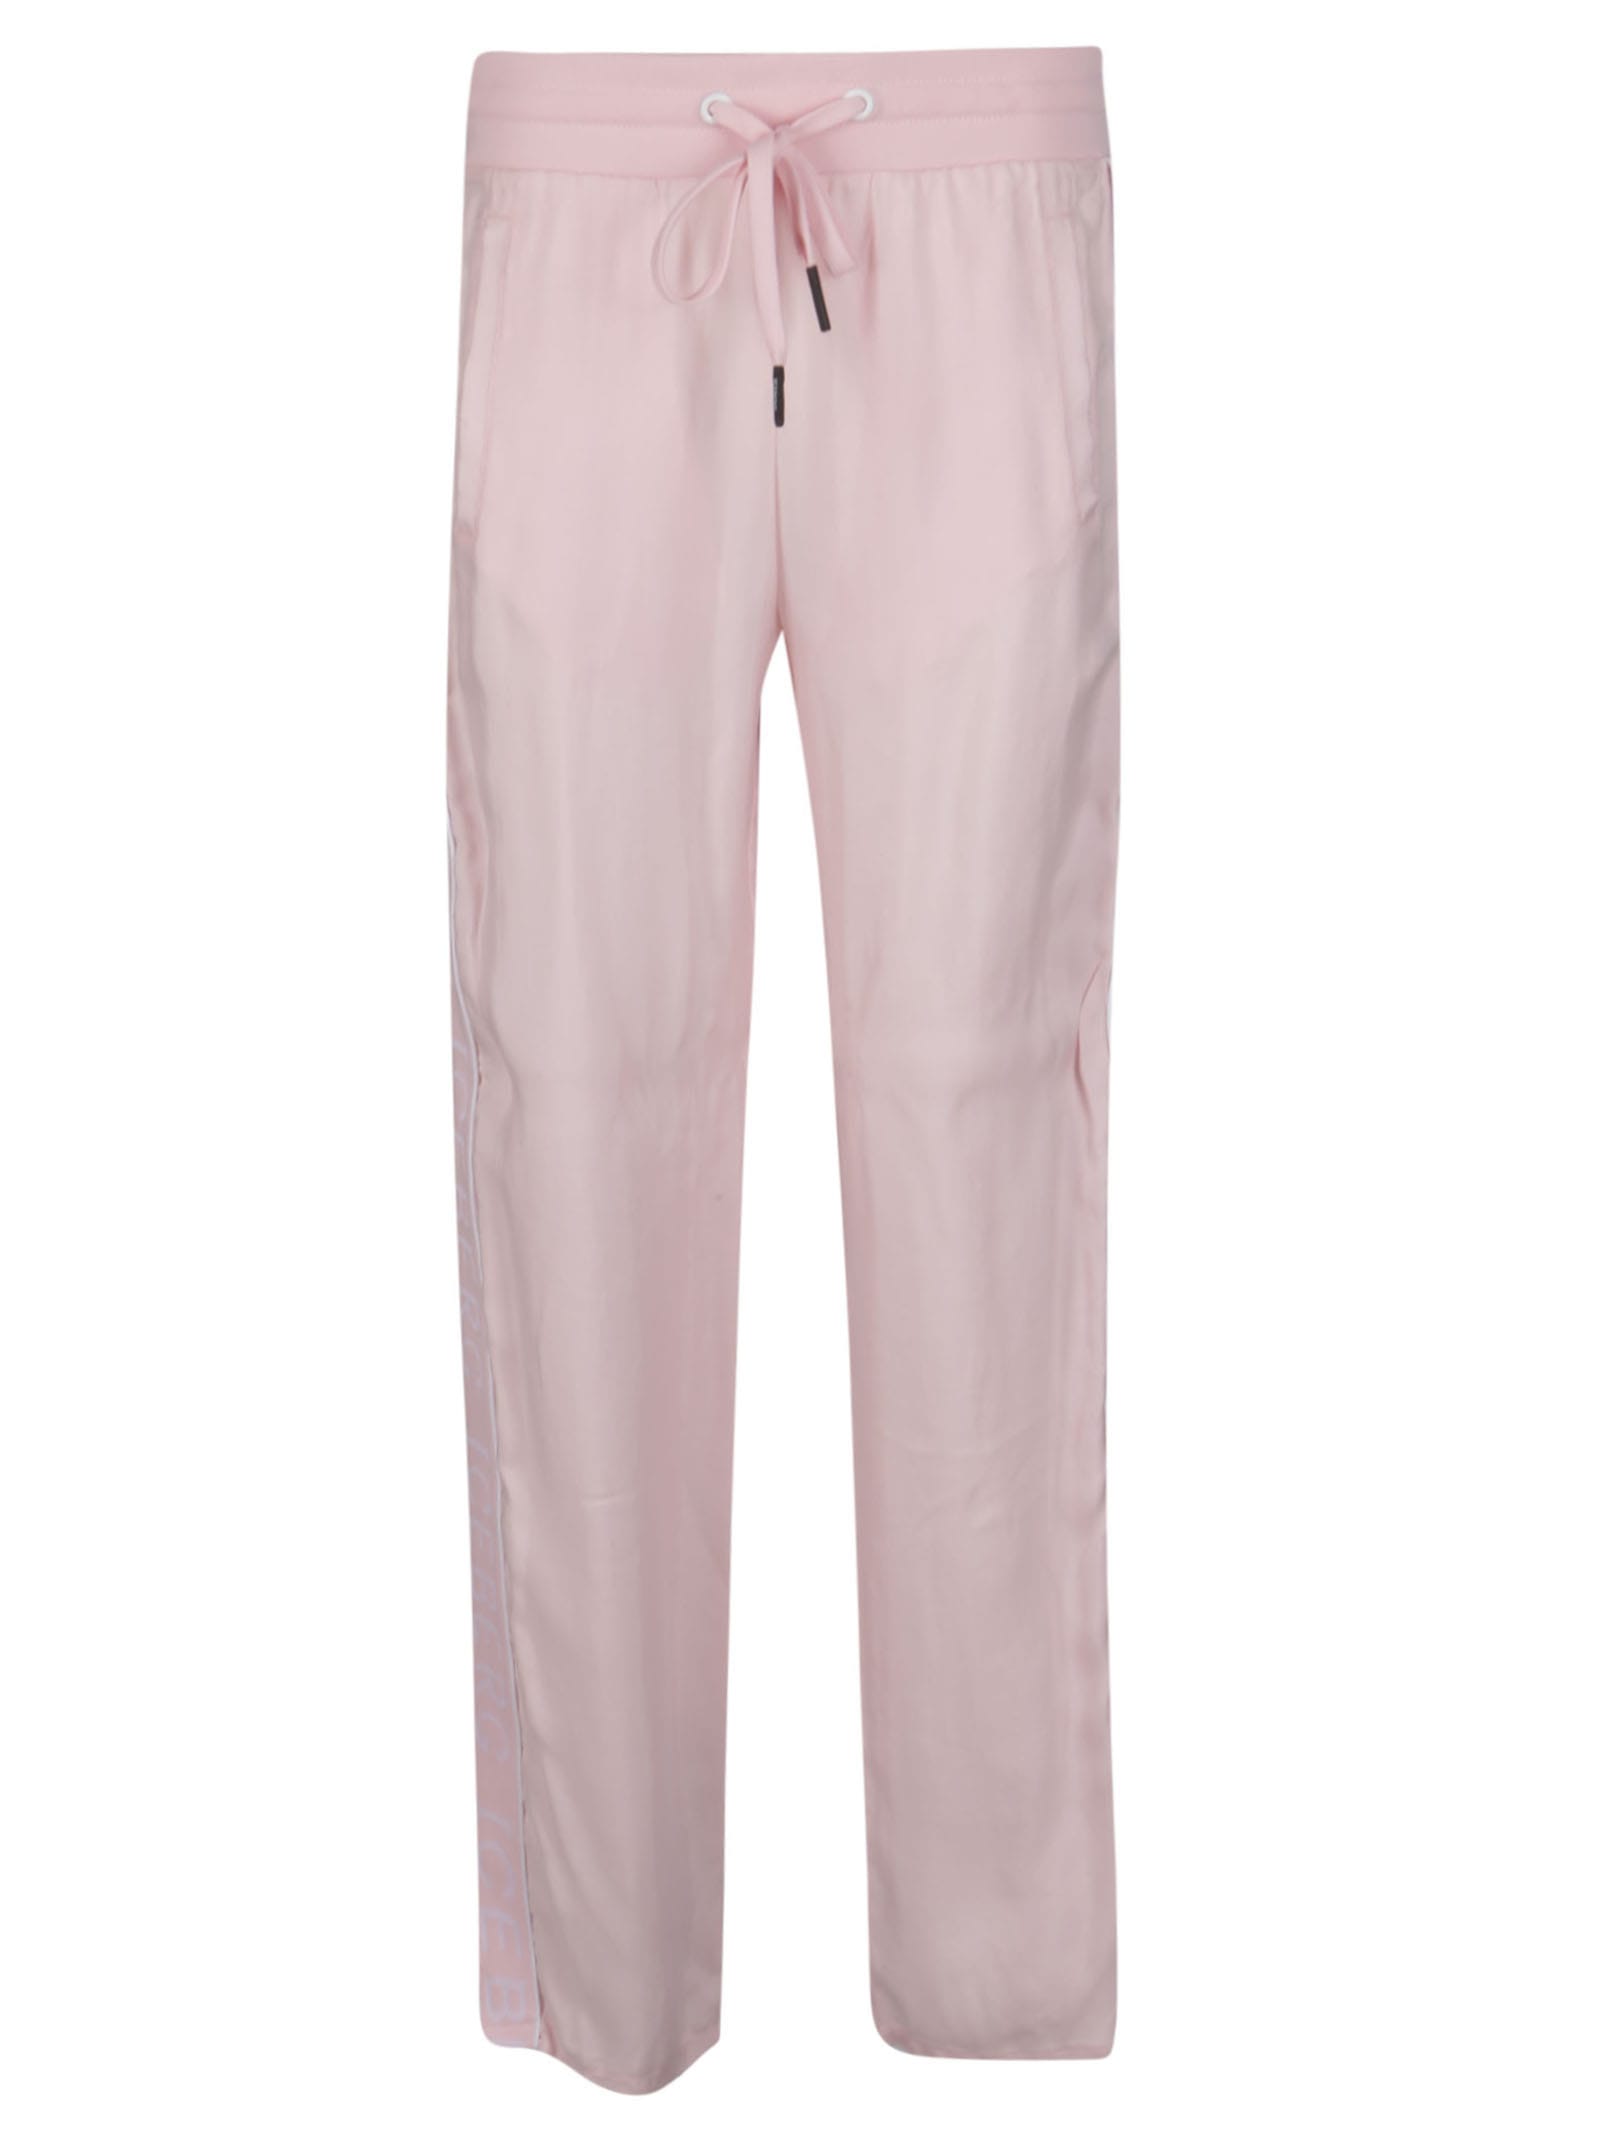 ICEBERG PINK COTTON TROUSERS,11314693